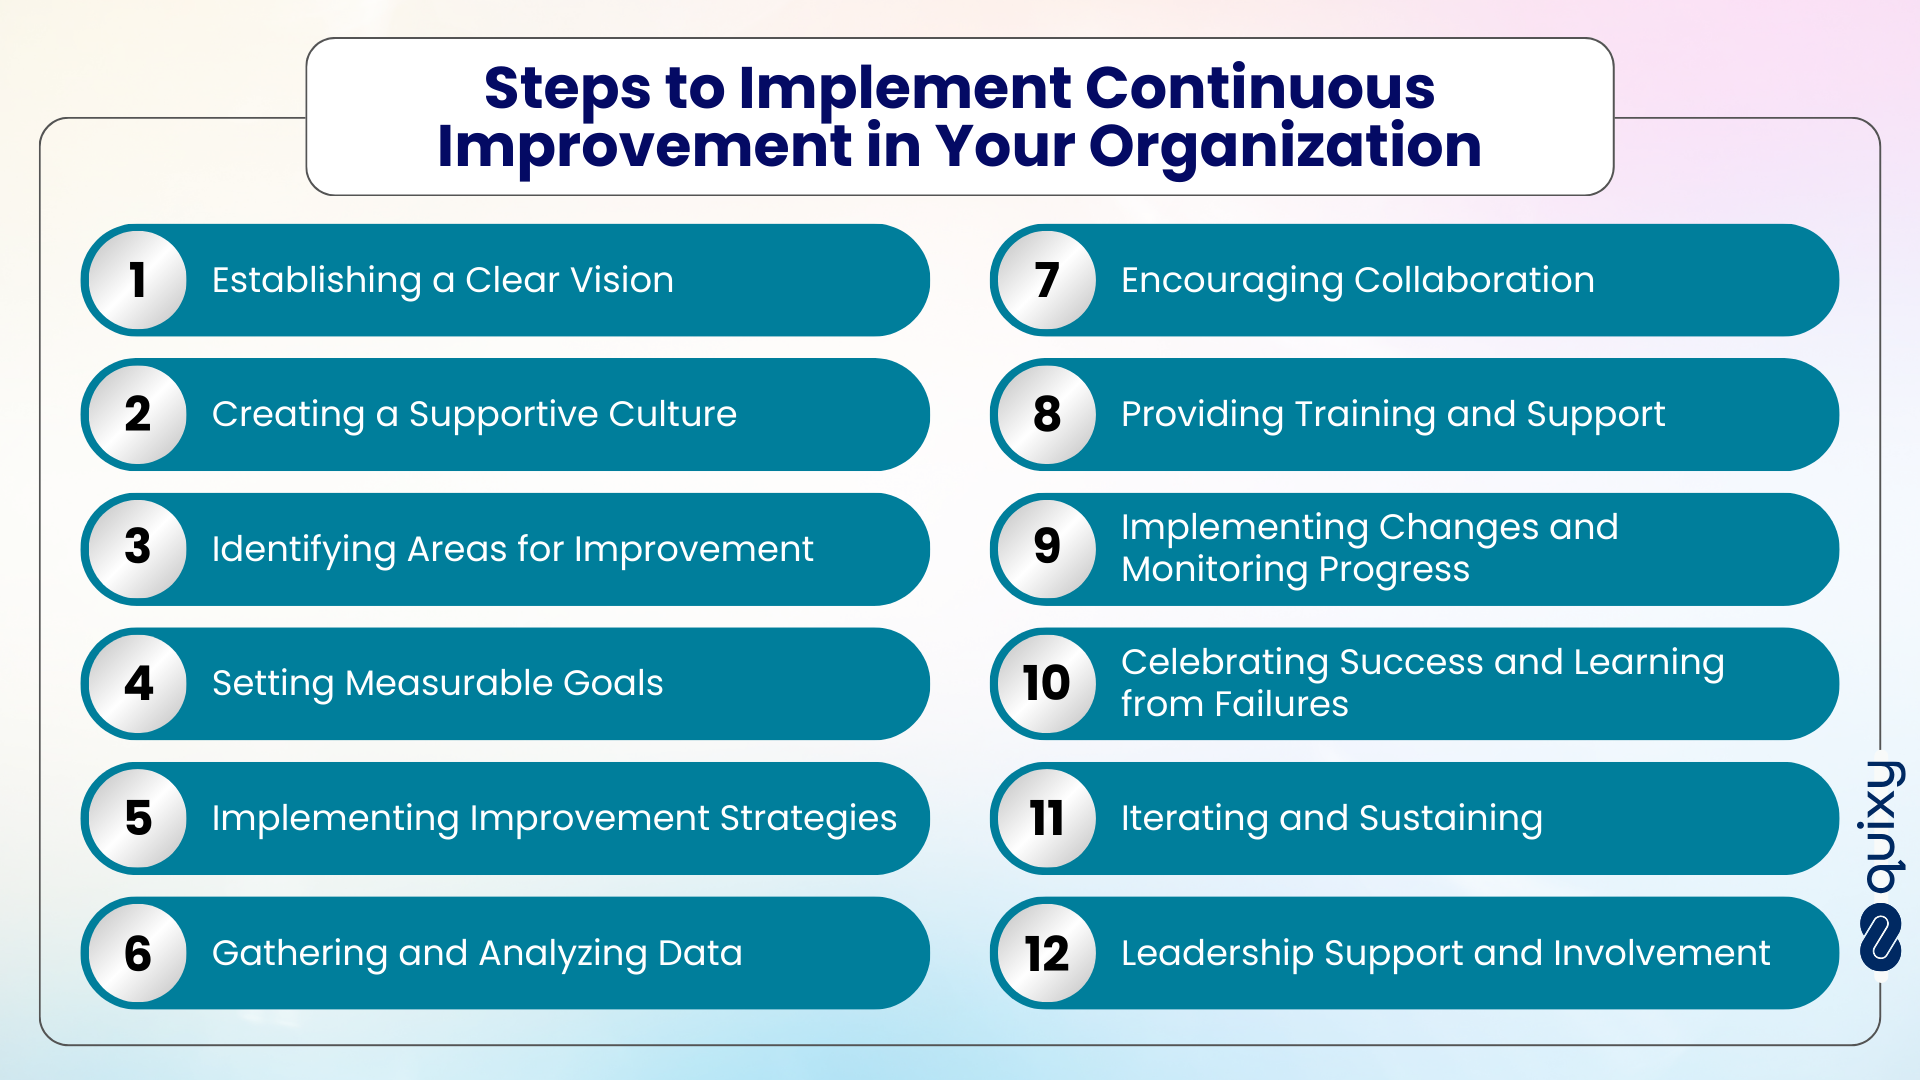 Steps to Implement Continuous Improvement in Your Organization